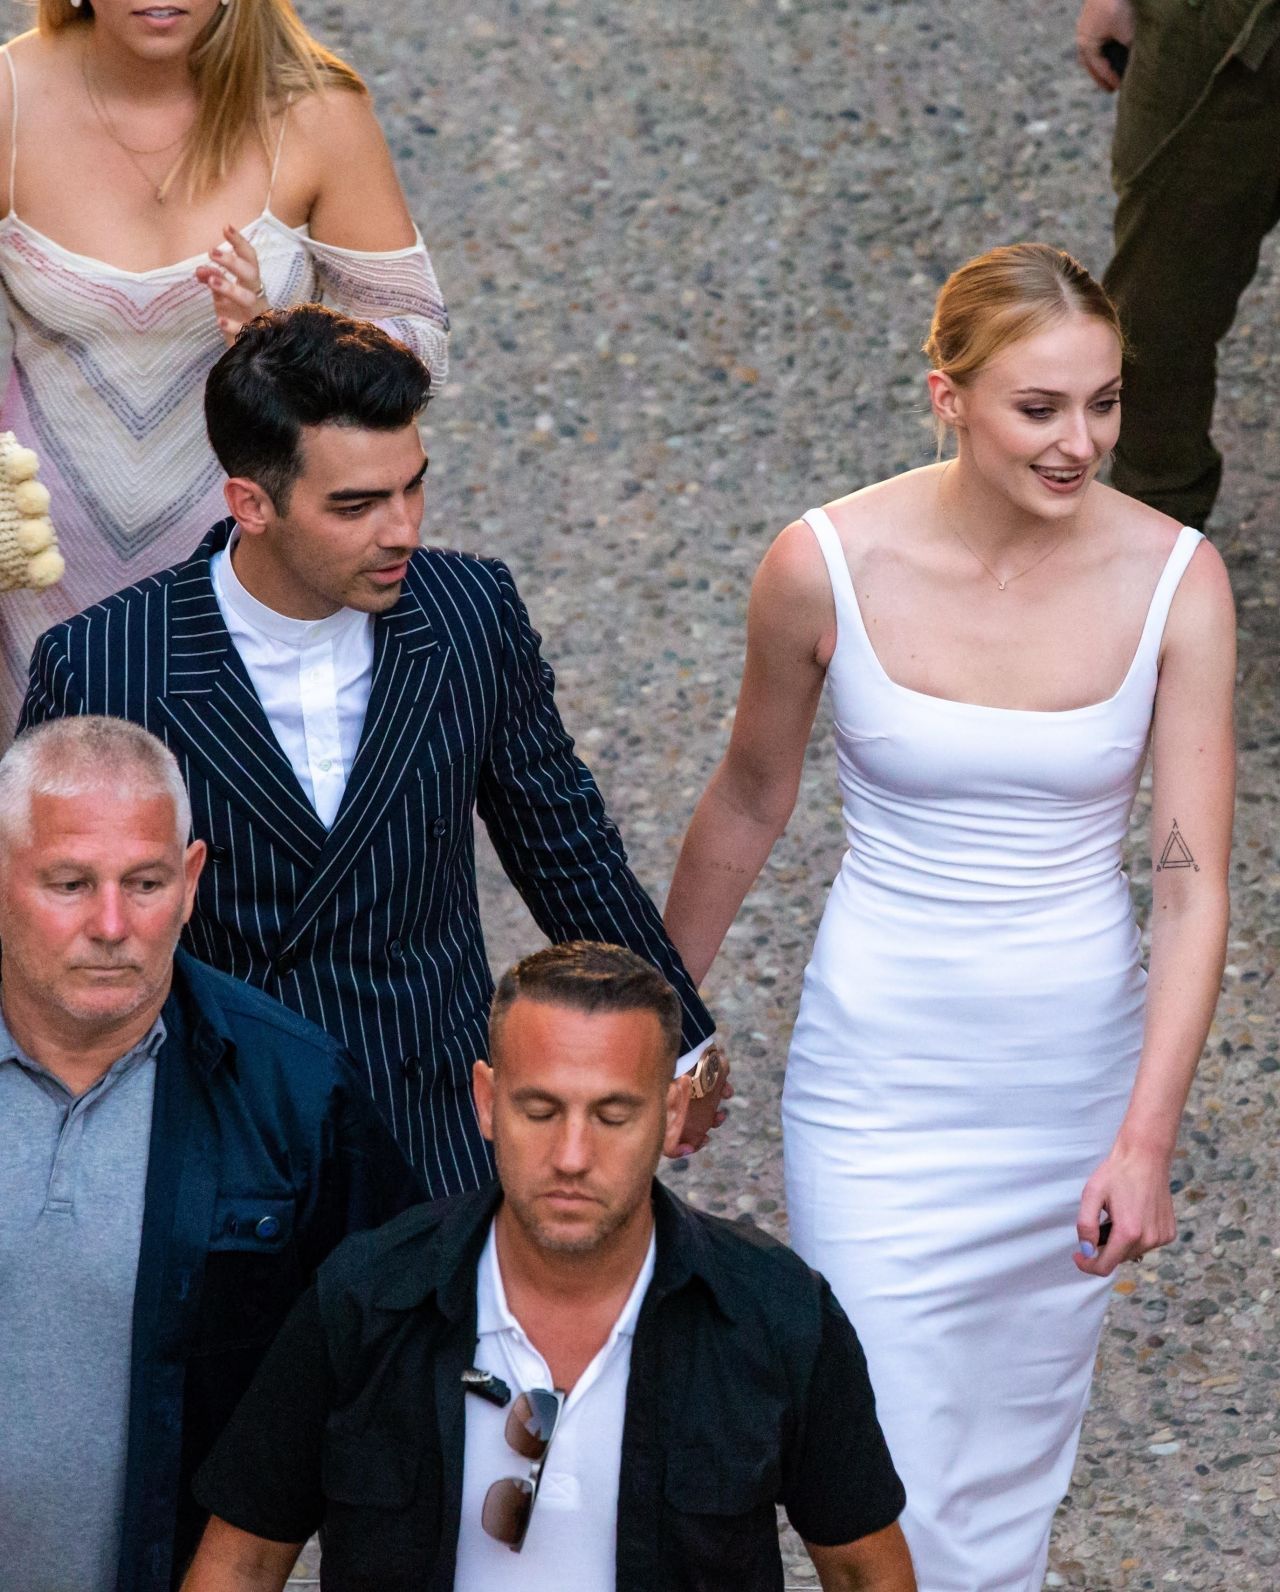 Sophie Turner - Pre-Wedding Party in the South Of France 06/28/20191280 x 1592